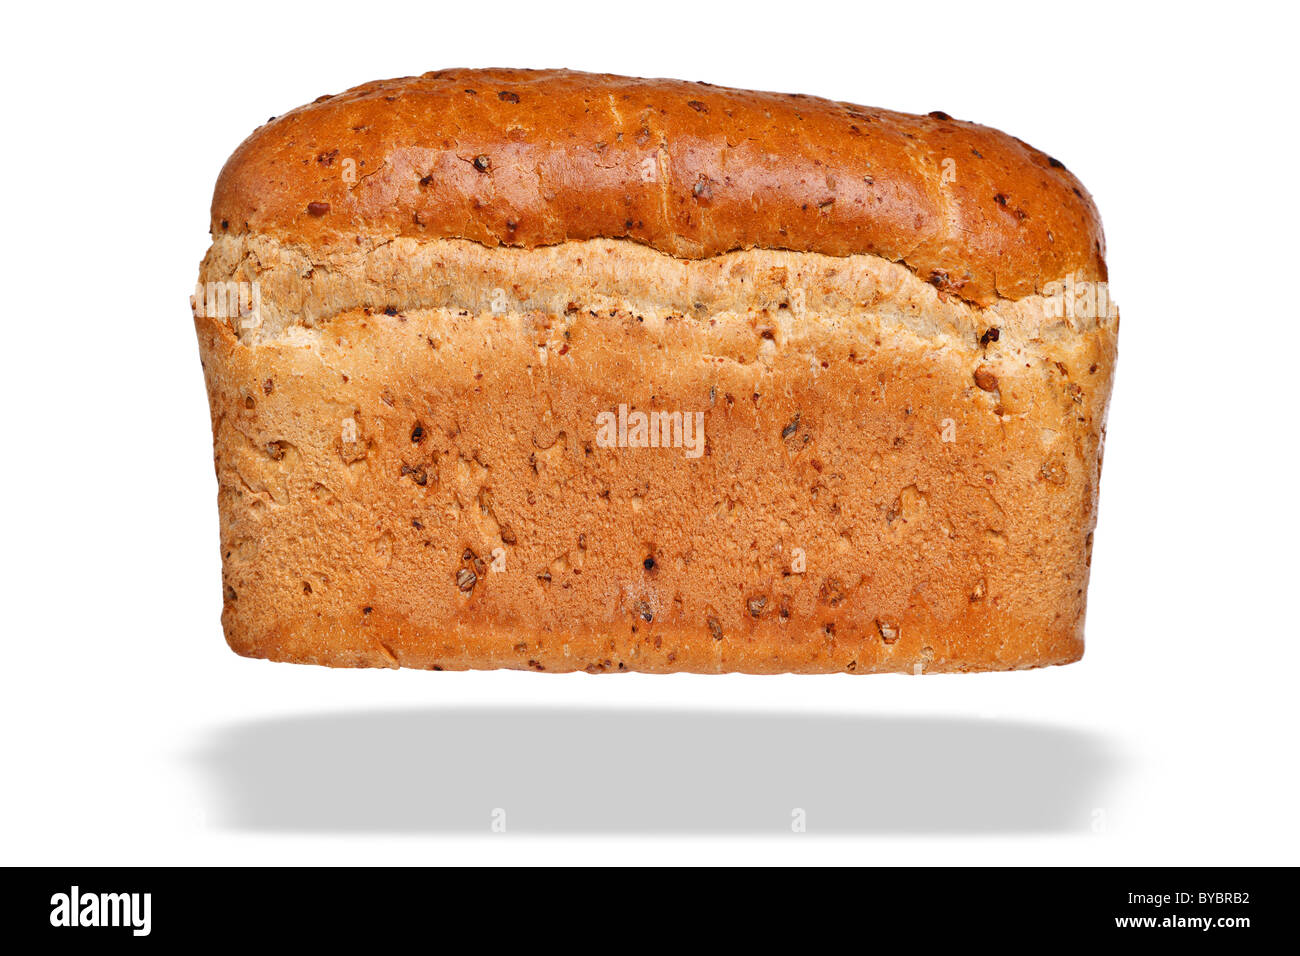 Photo of a wholemeal Granary loaf of bread, isolated on a white background with floating shadow. Stock Photo